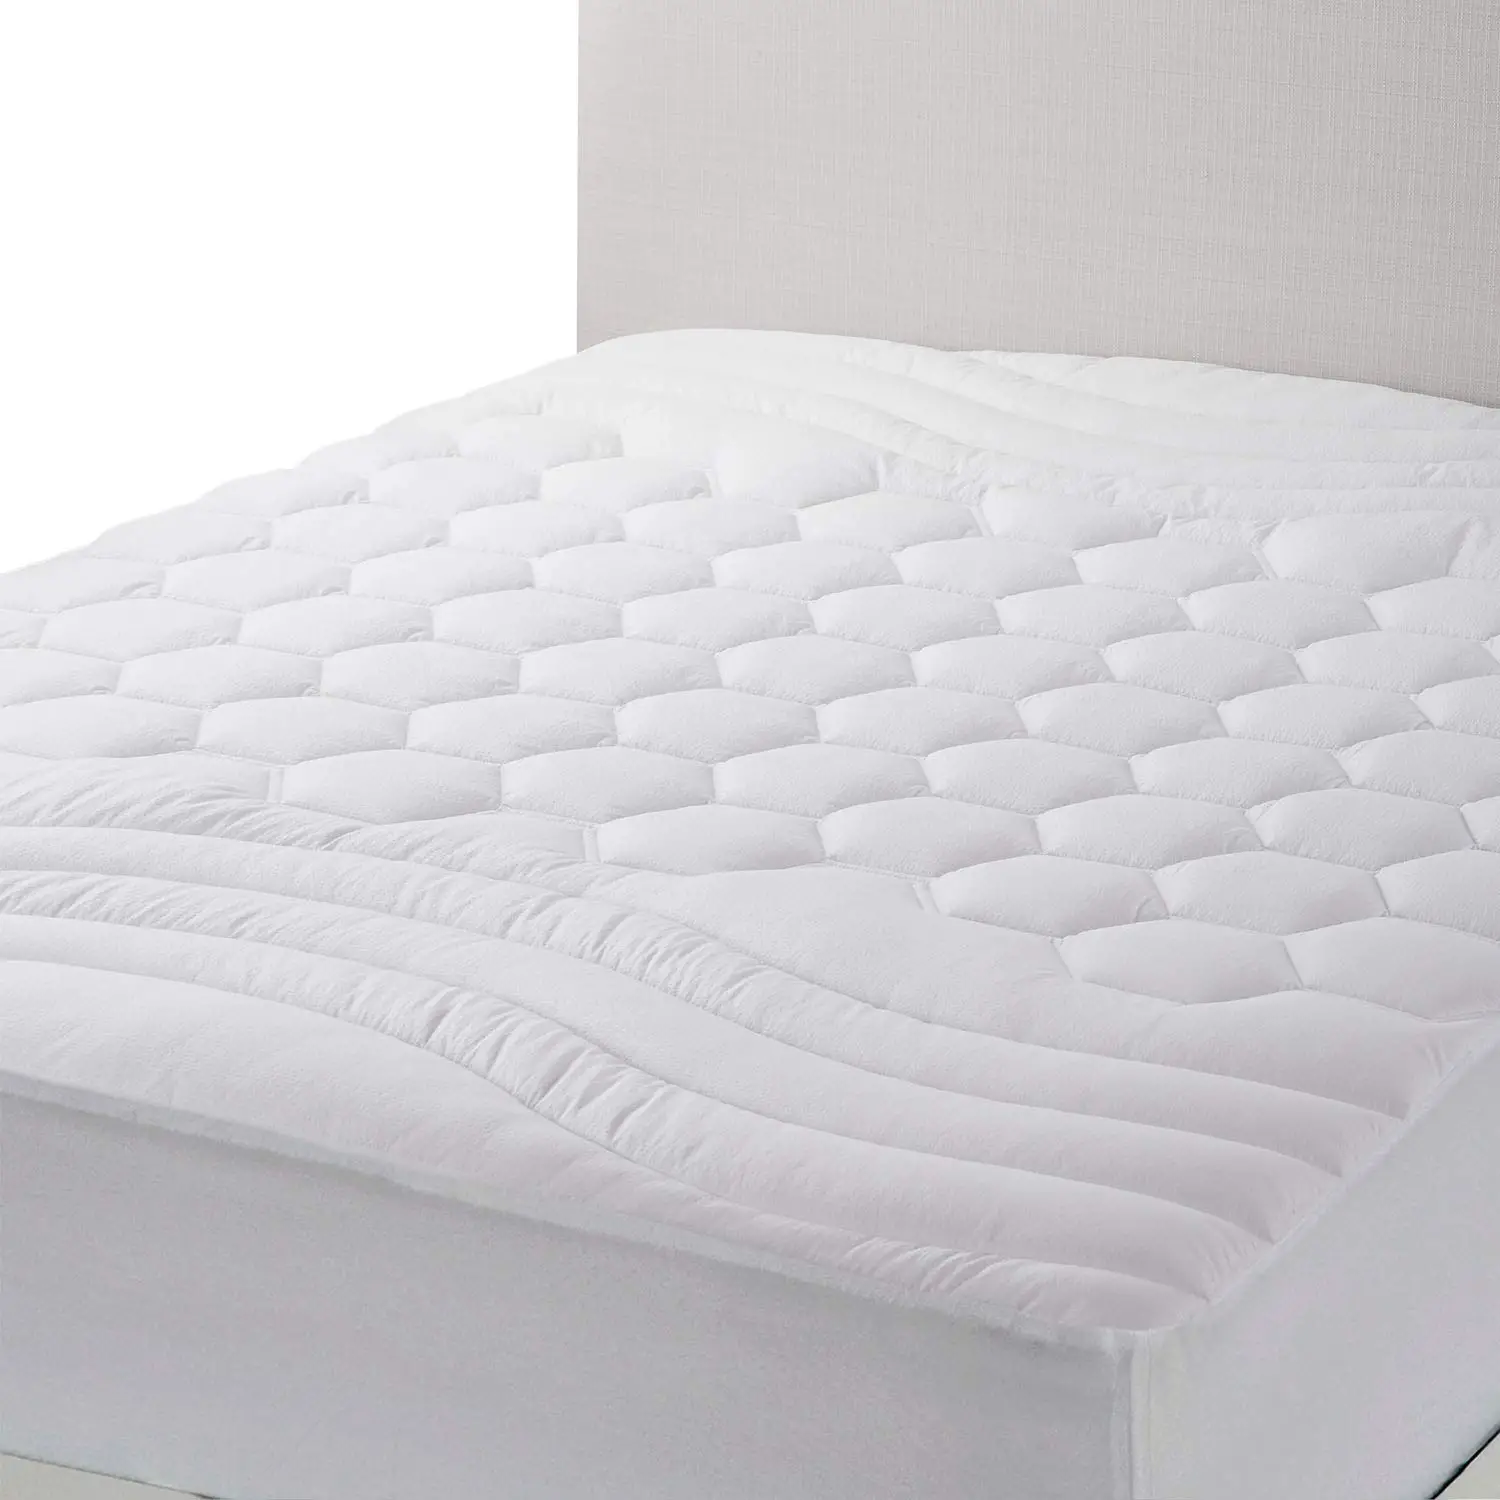 What is the Best Mattress Topper to Keep You Cool?